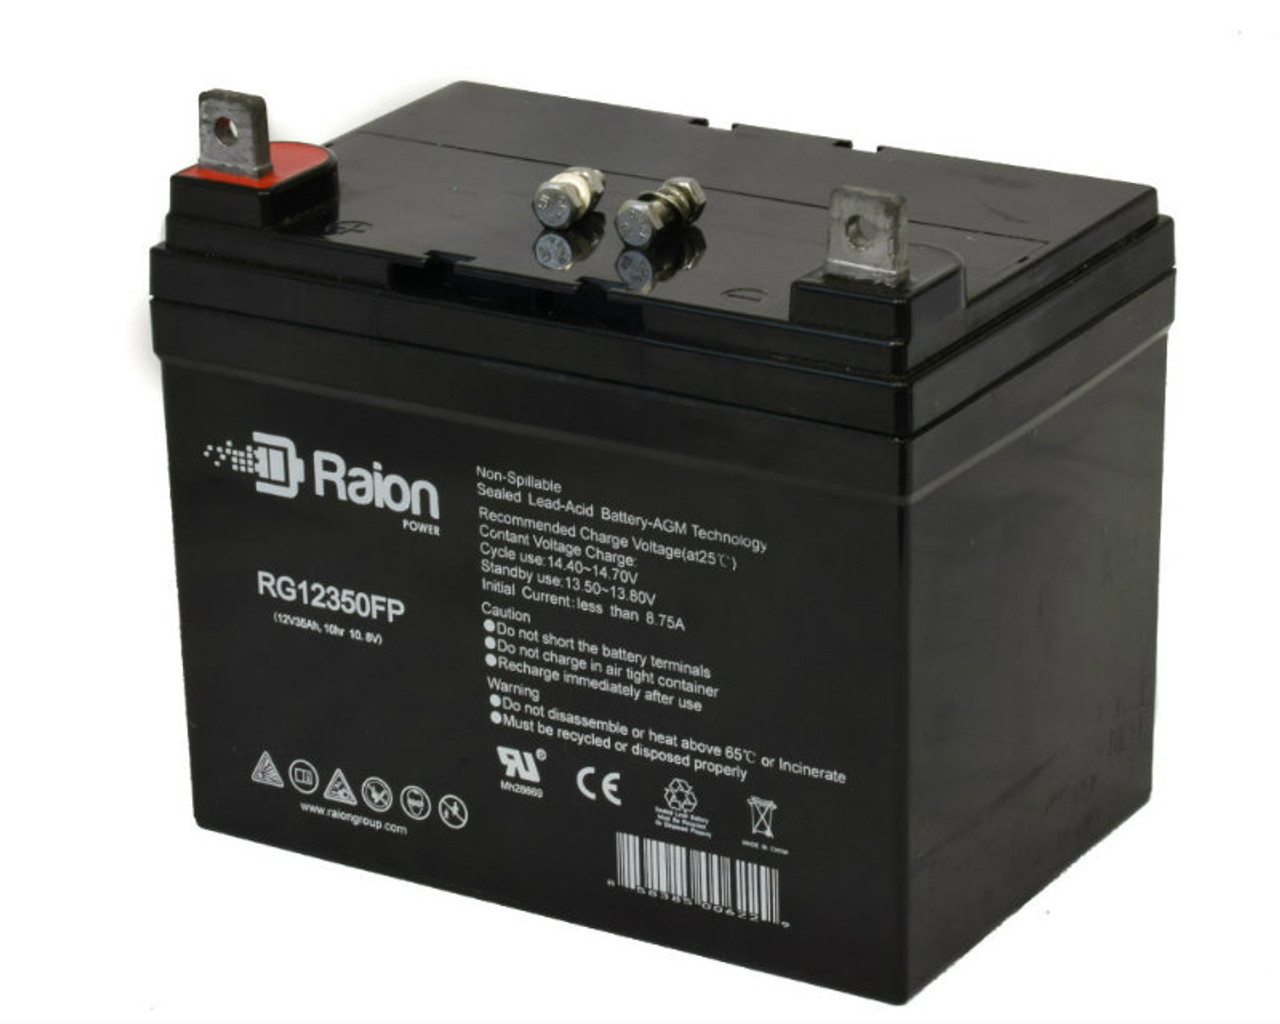 Raion Power Replacement 12V 35Ah Battery for Agco Allis 1616H - 1 Pack